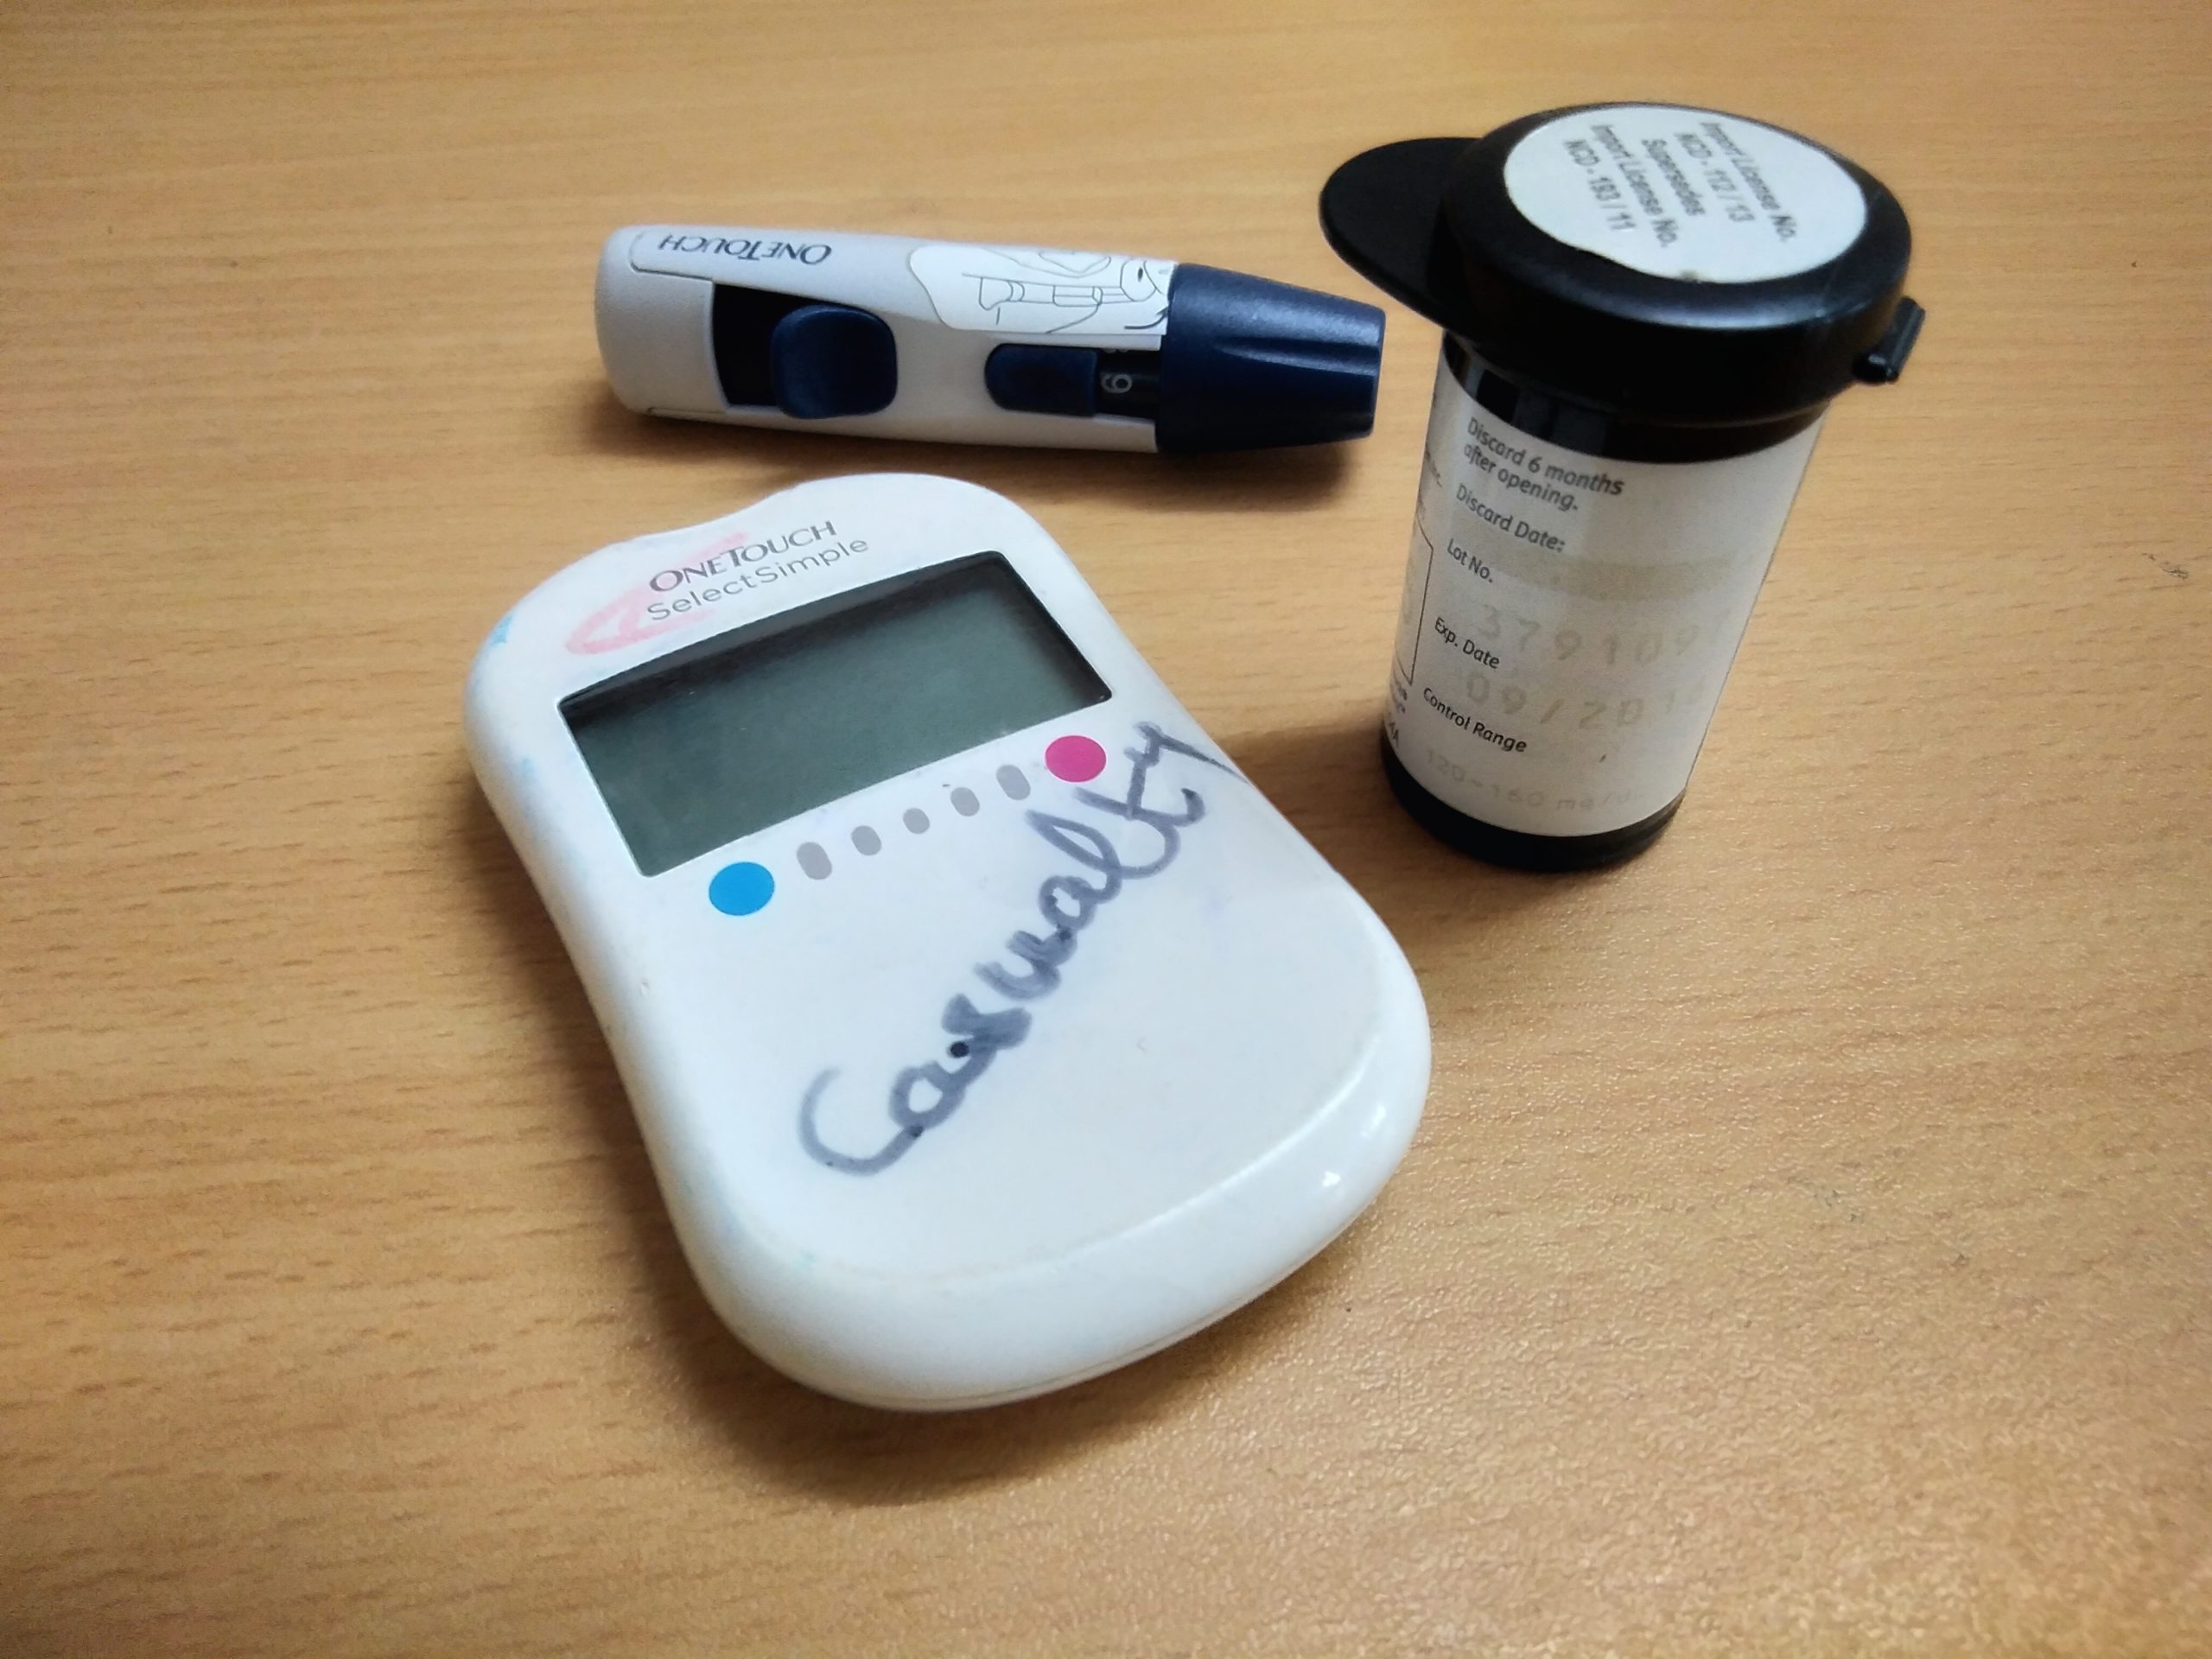 A glucometer with strips and lancet